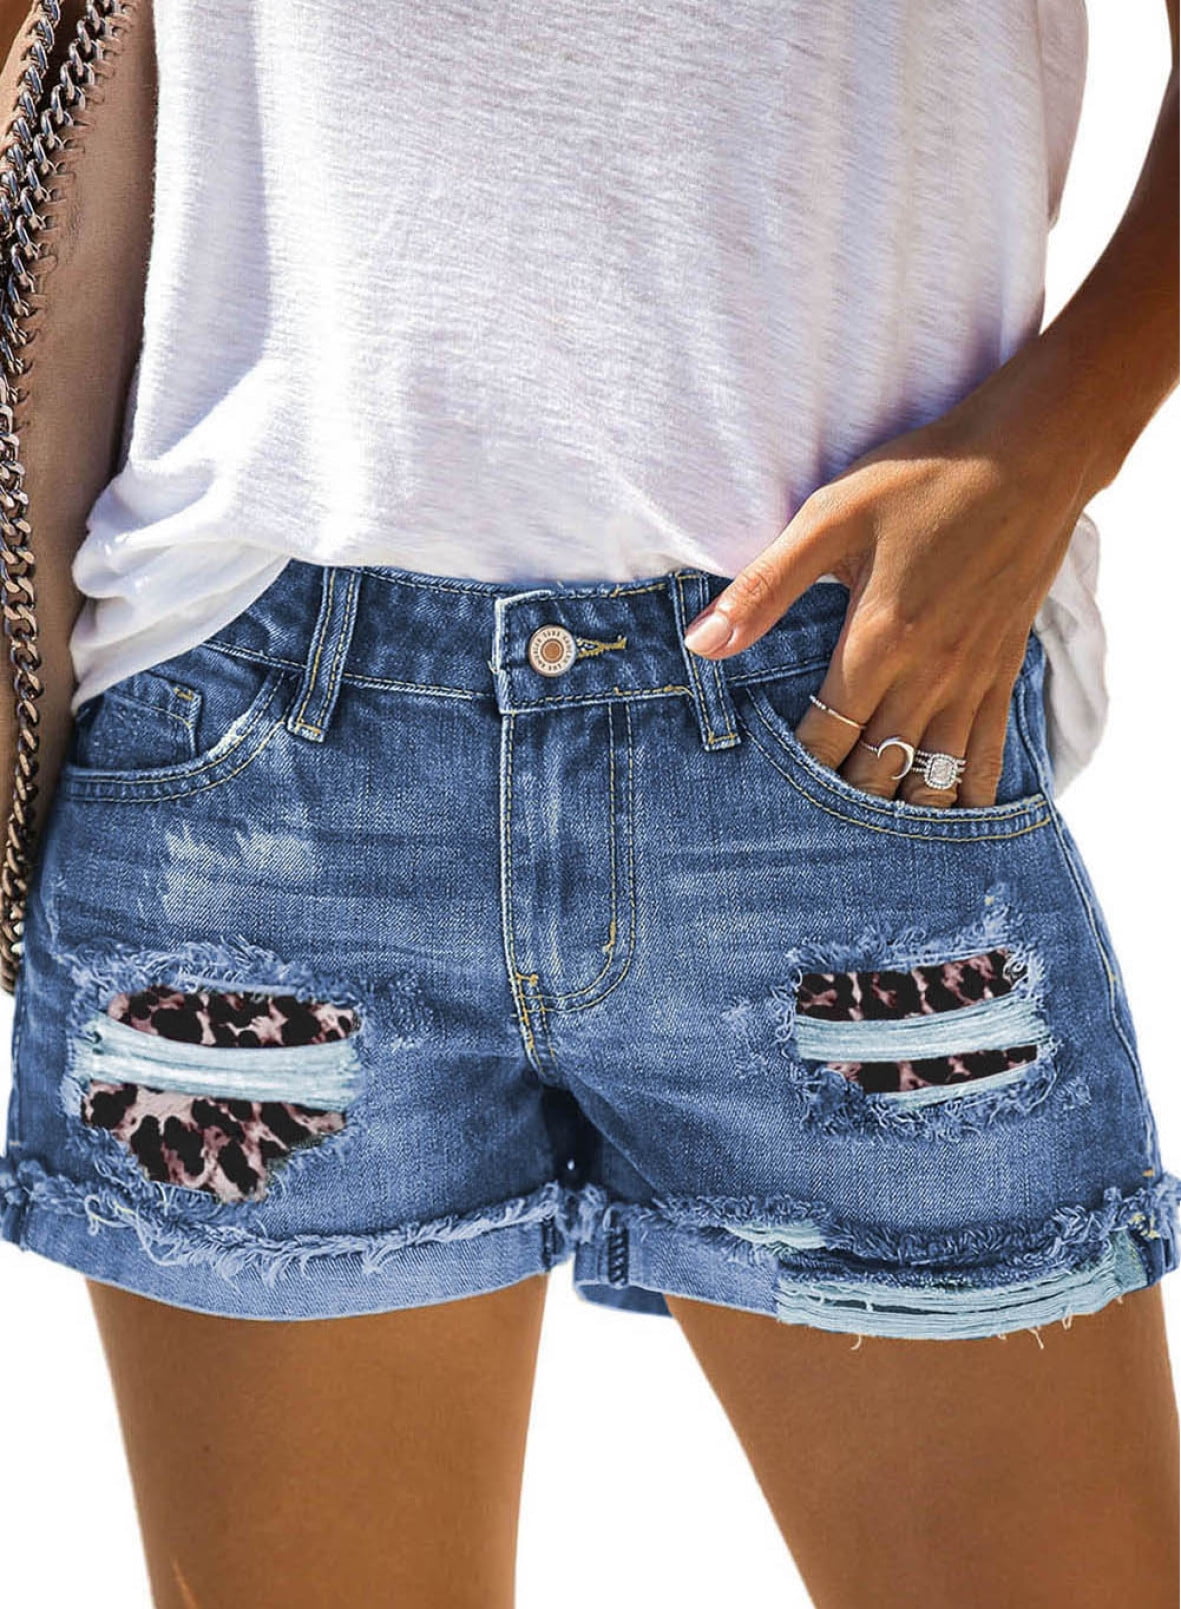 Forthery Denim Hot Shorts For Women Casual Summer Mid Rise Shorts Frayed Raw Hem Ripped Short Pants Jeans